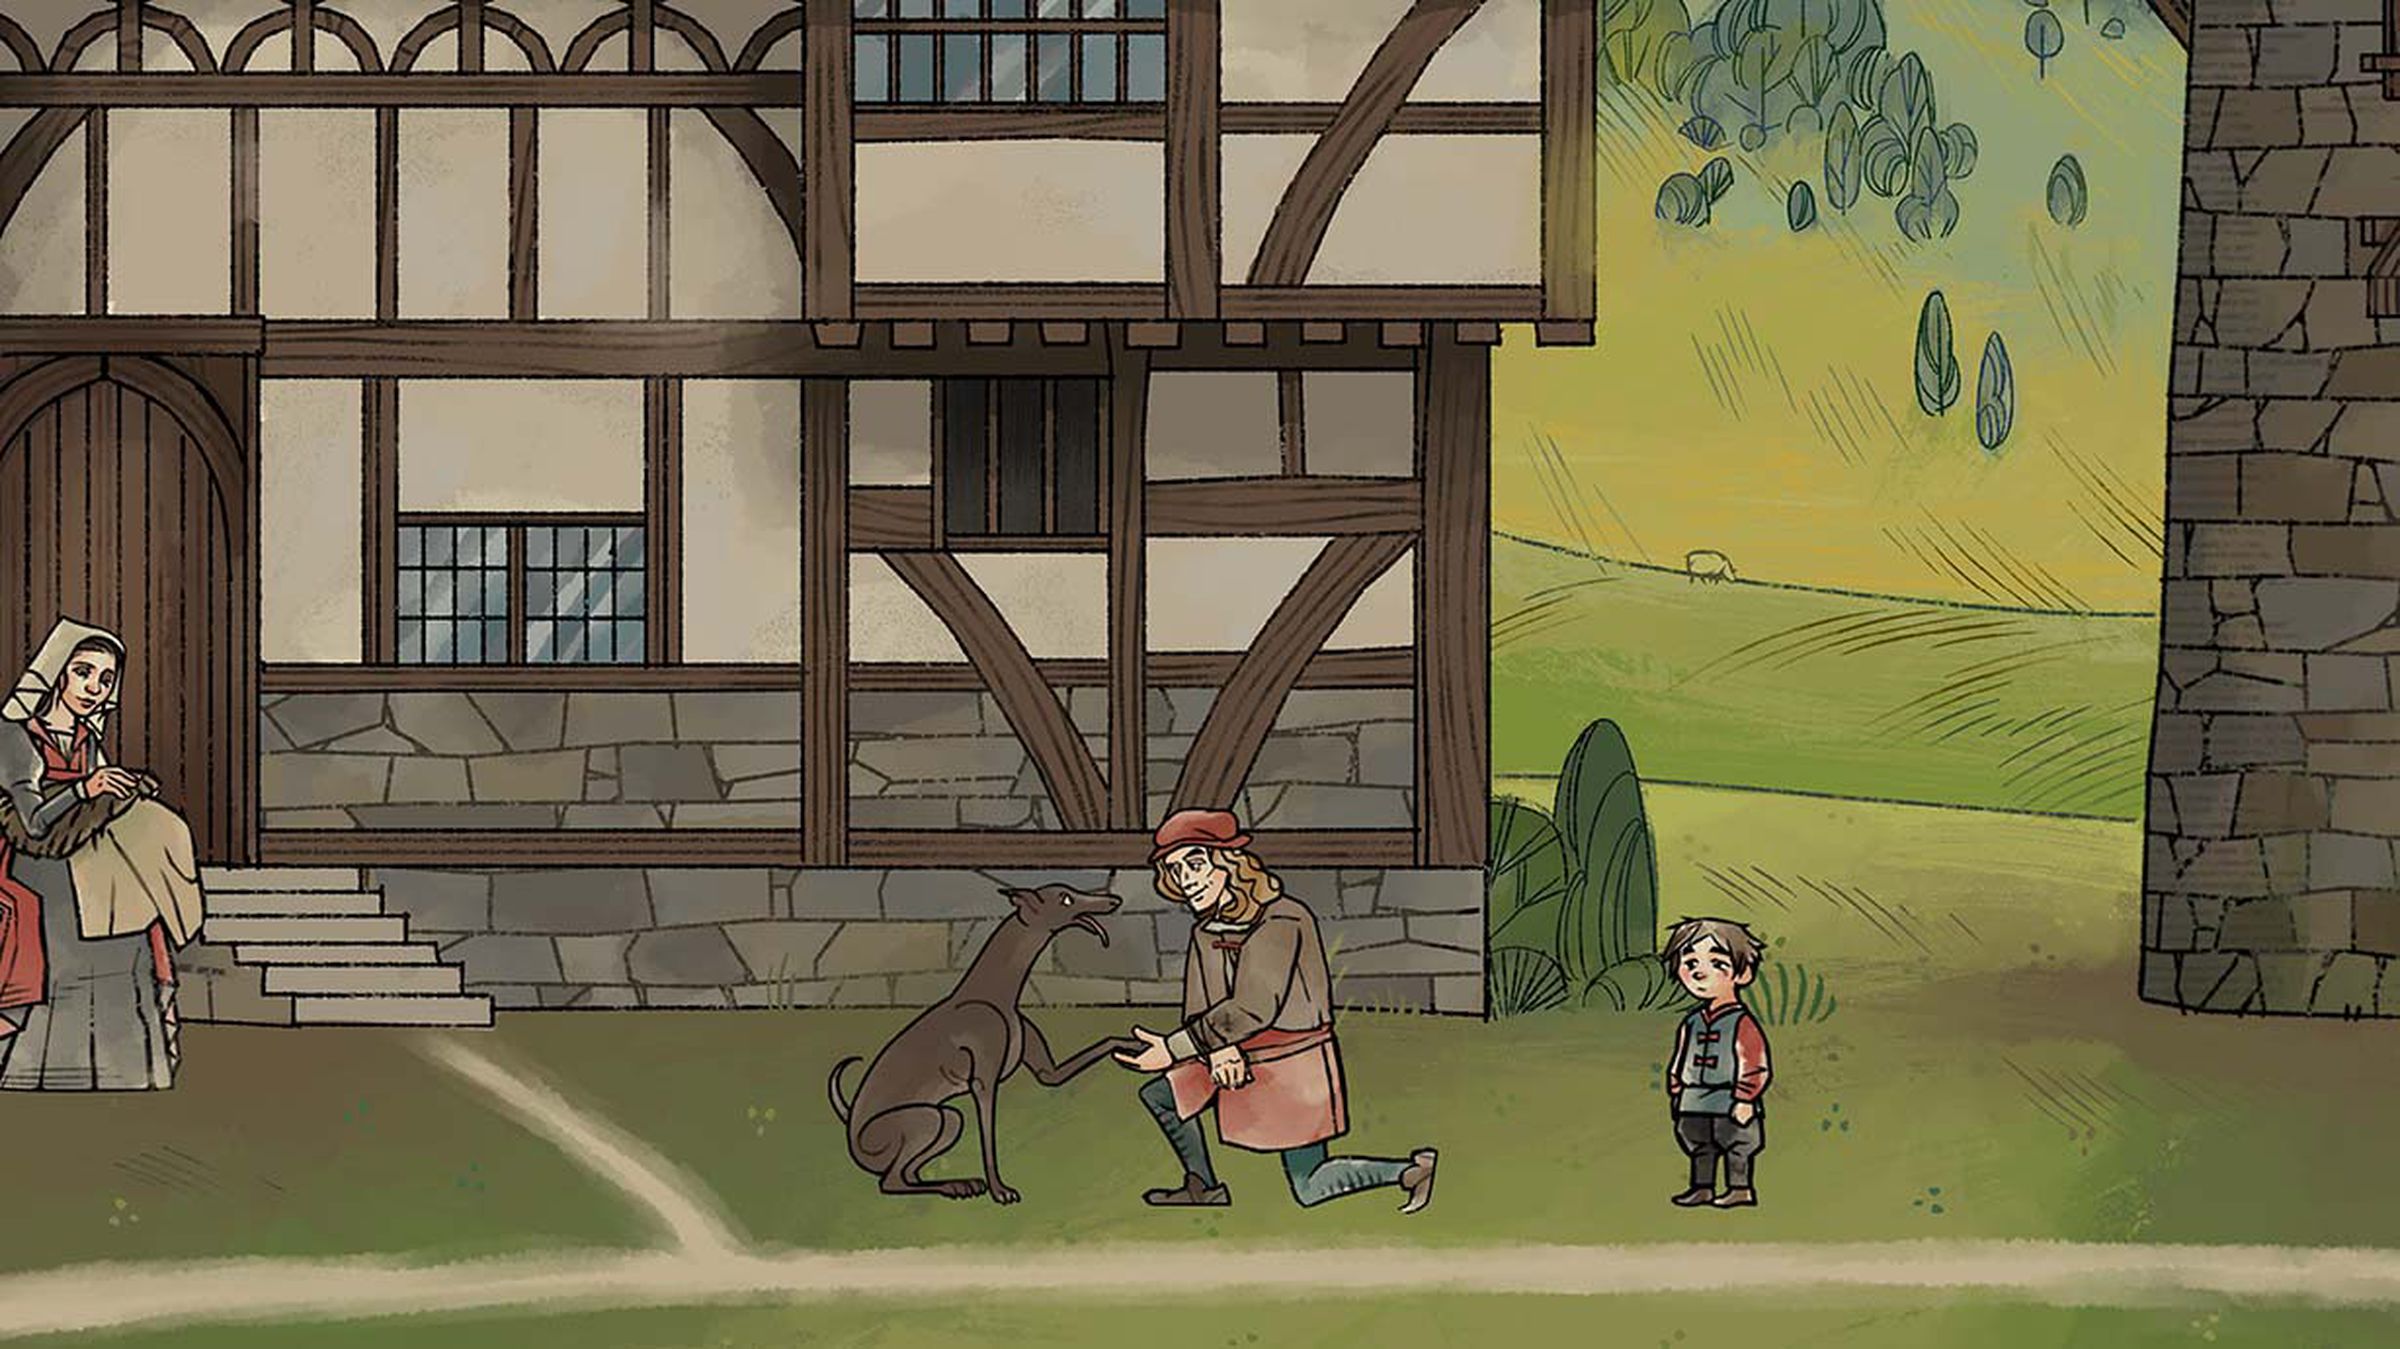 Screenshot from Pentiment featuring a man in 16th-century clothing animated to look like a picture from an illustrated manuscript, petting a greyhound as a small child looks on.